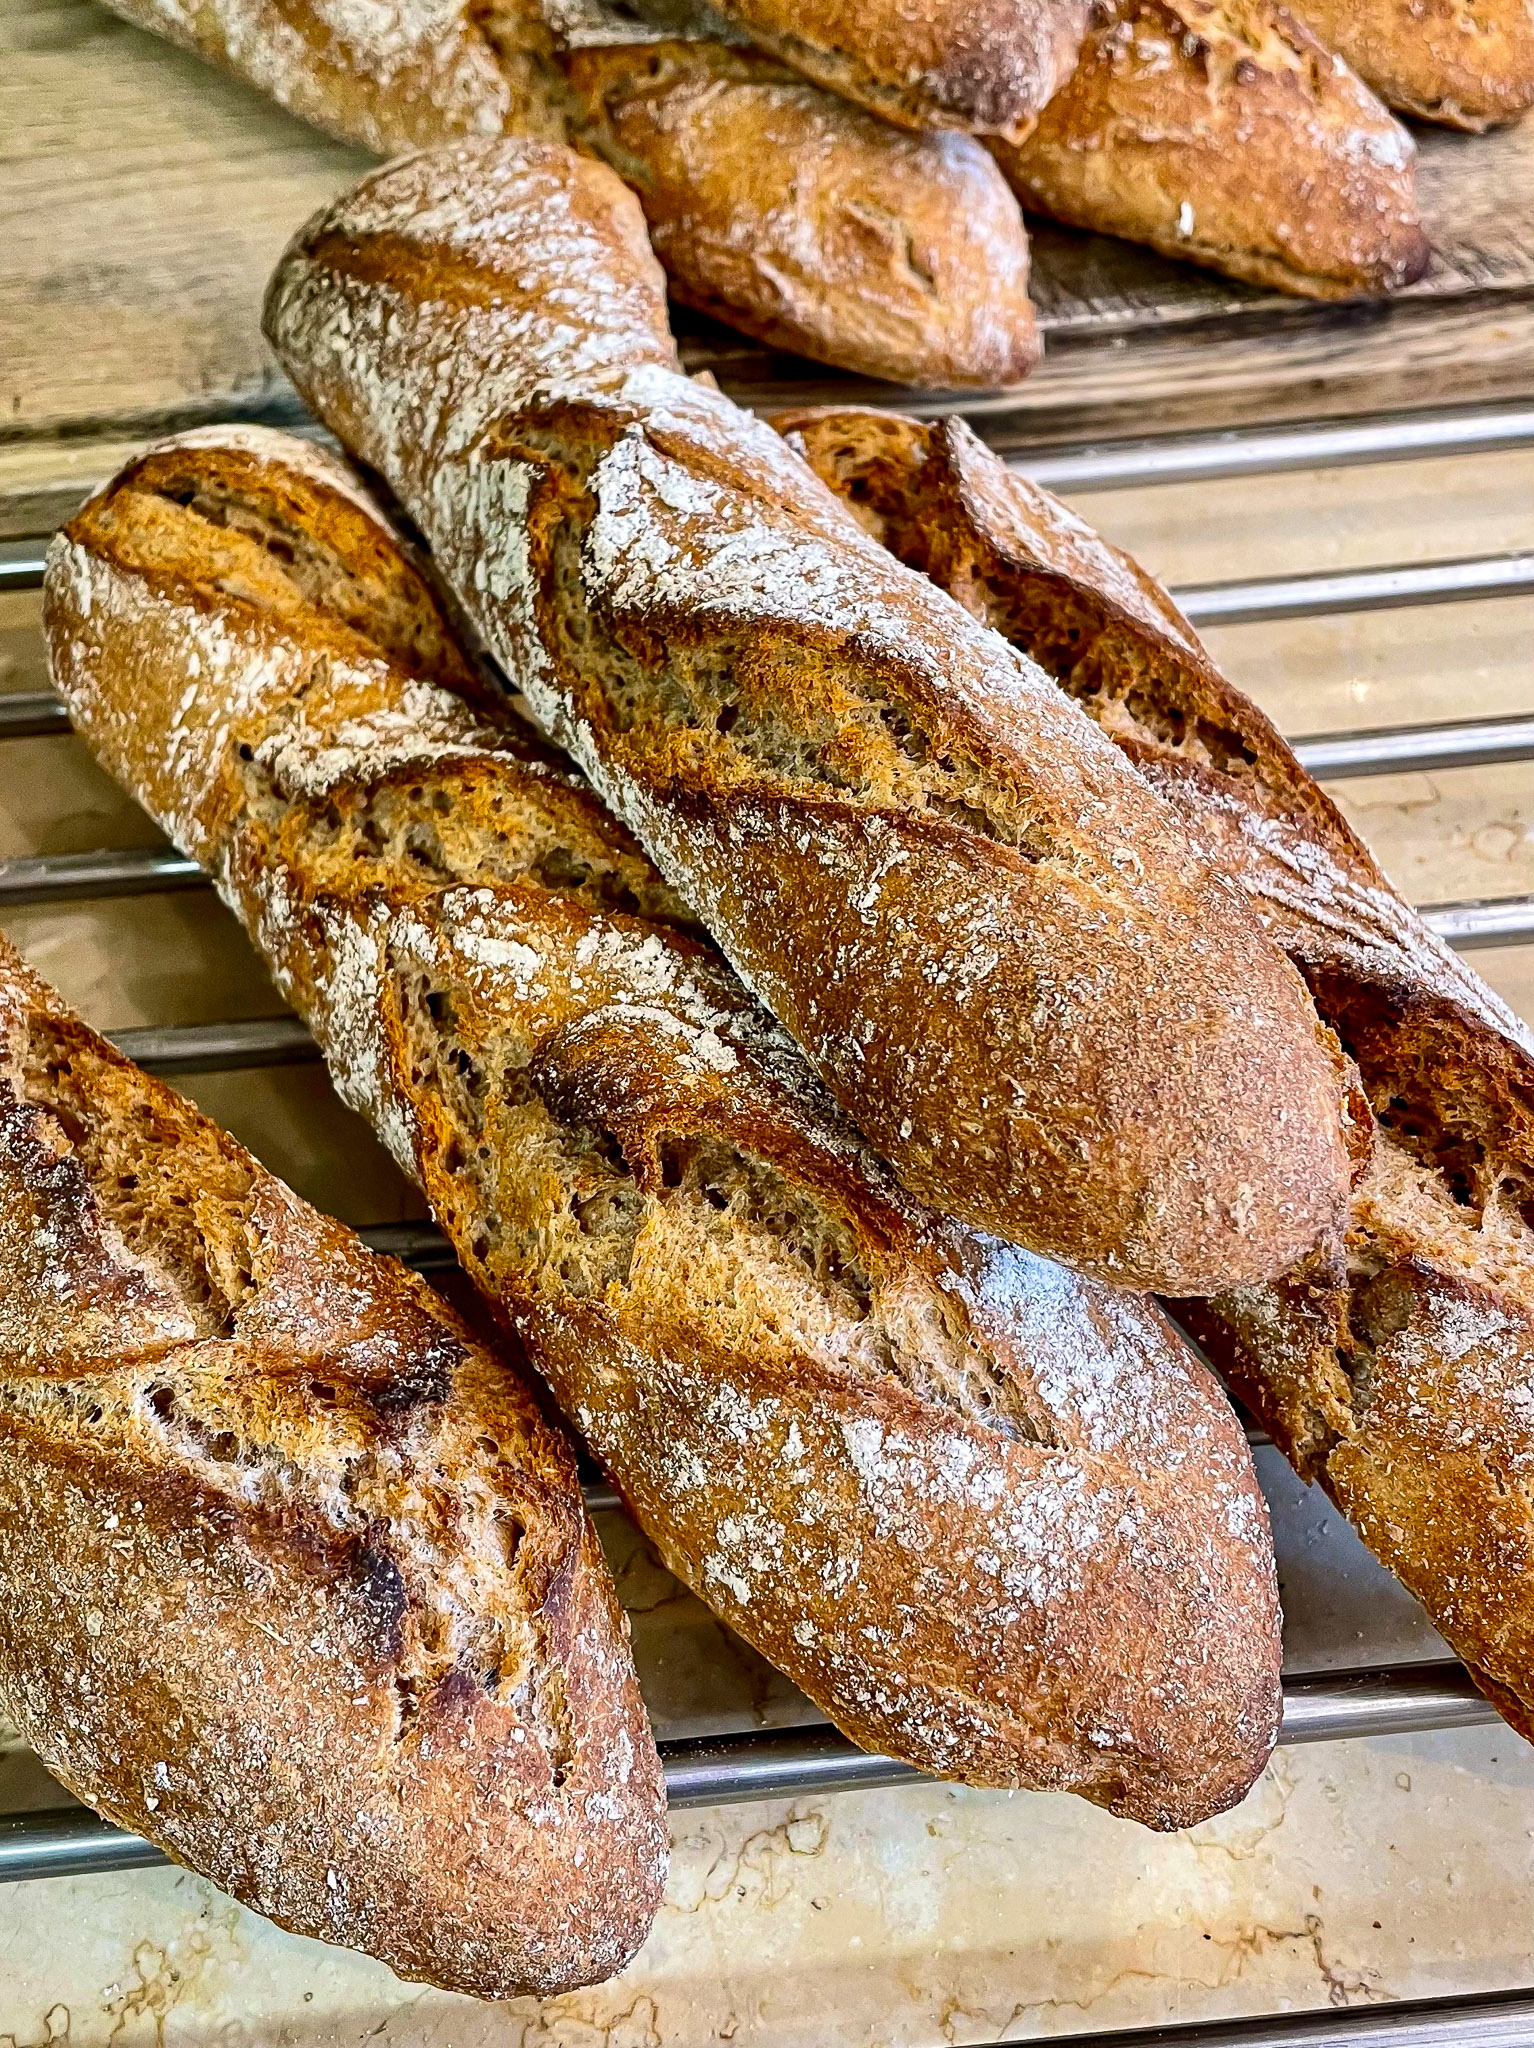 alt="a small pile of freshly made sourdough baguettes."